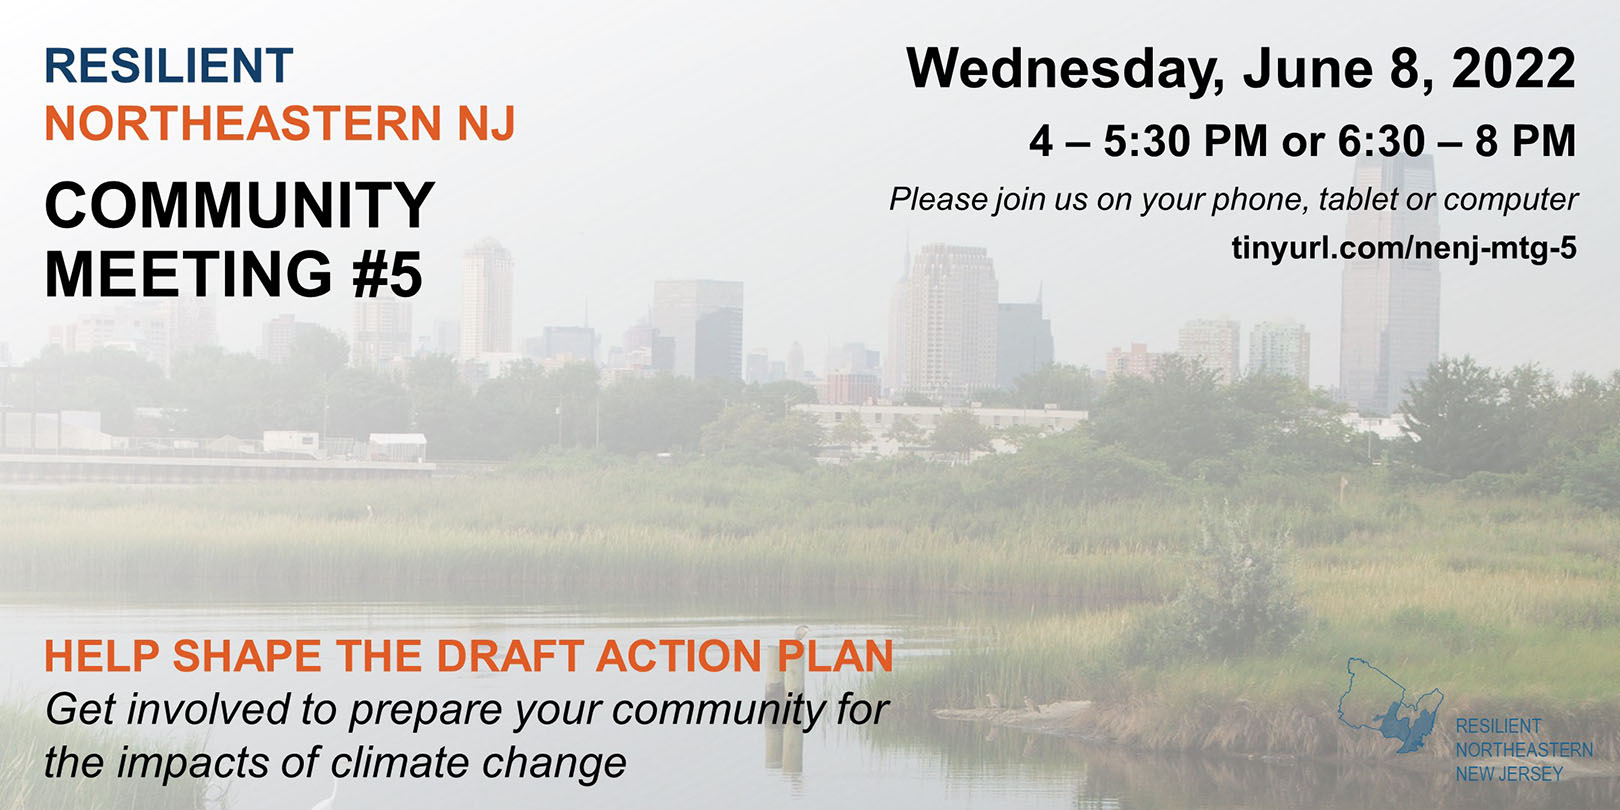 HELP SHAPE THE ACTION PLAN AT COMMUNITY MEETING #5